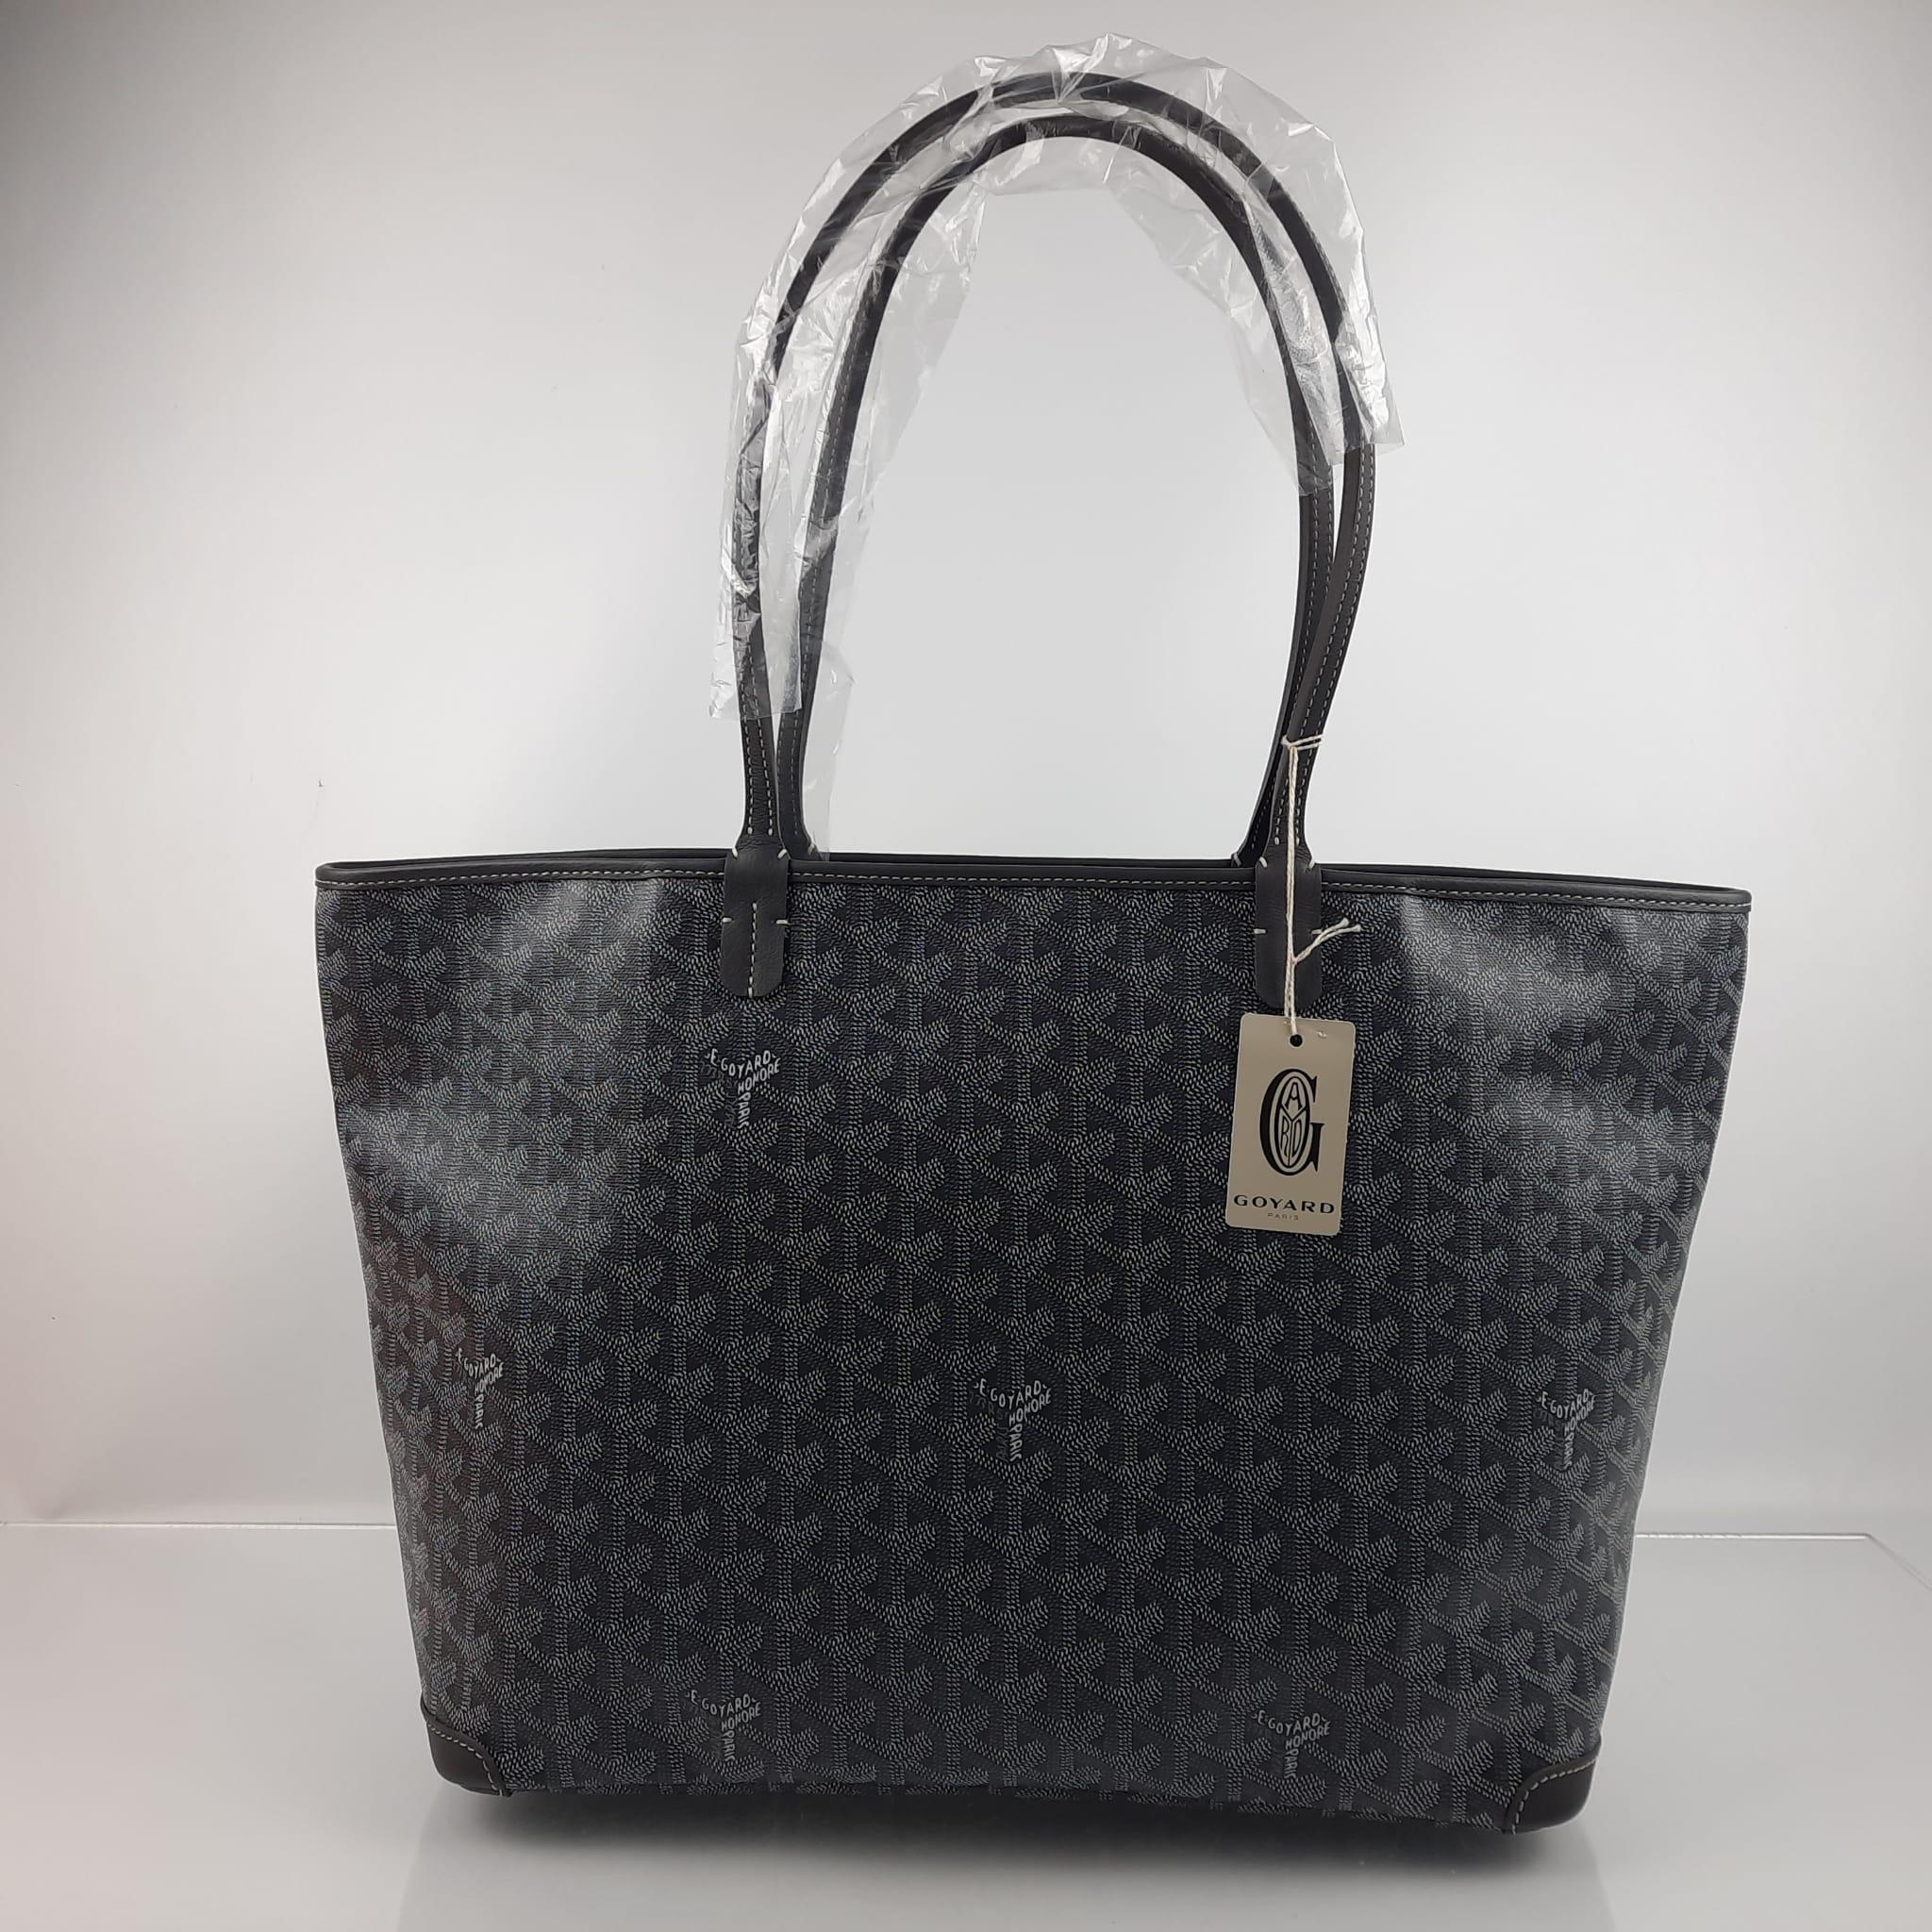 Goyard's Bag dont have cardboard box, it will  be ship with dust bag and authenticity card
The Artois MM bag is a nod to our emblematic Saint Louis bag in a structured and secure version as it has four leather corners and a zip closure. It also has